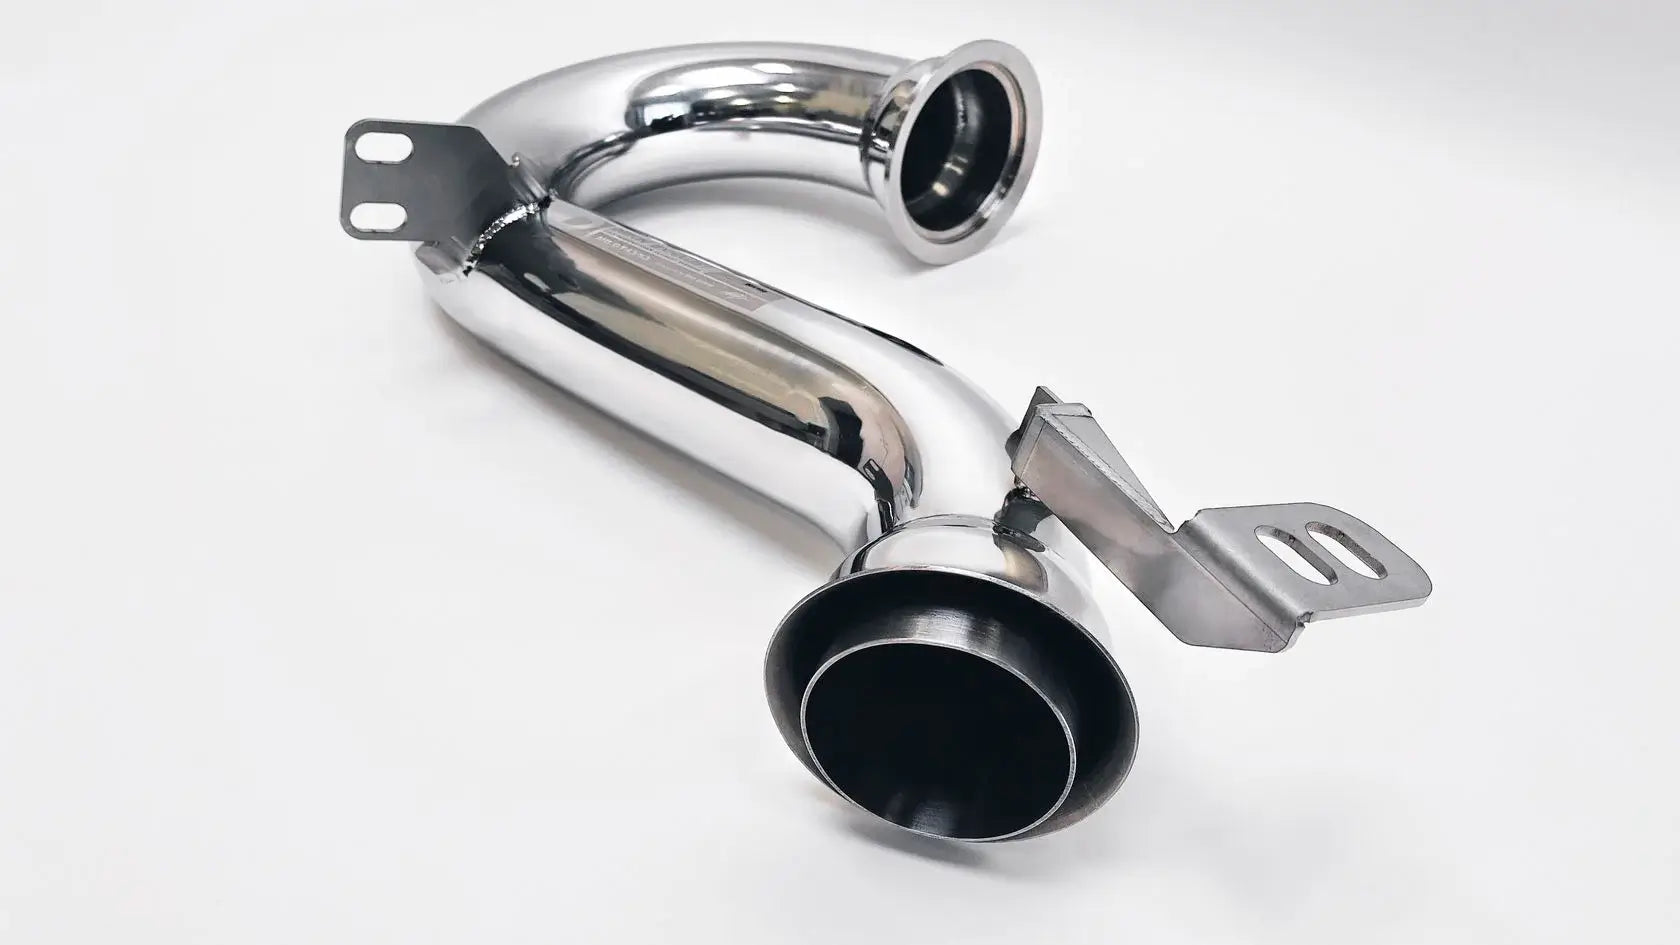 DEIKIN 10-MB.GLE450.V167-DP Downpipe for Mercedes-AMG GLE450 (V167) without HeatShield Photo-1 